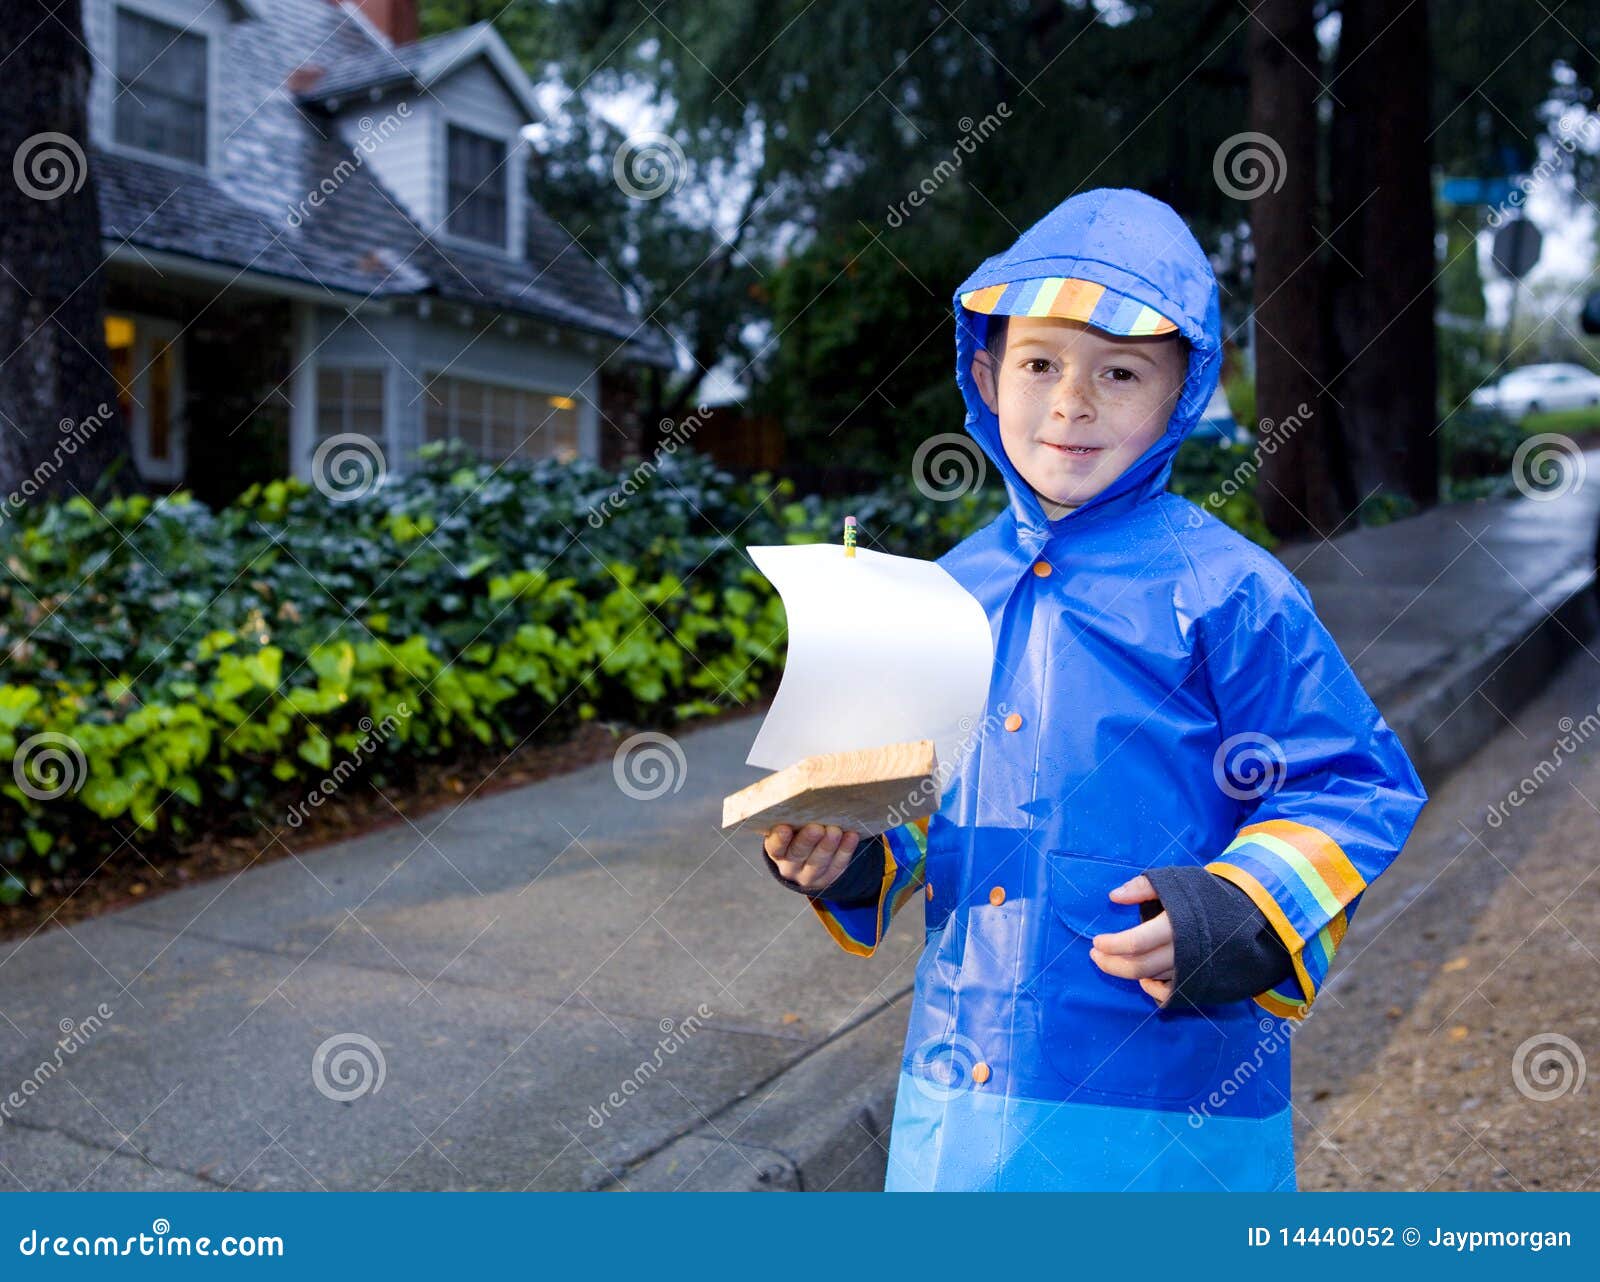 Young Boy Playing With Toy Boat In The Rain 2 Stock Ph